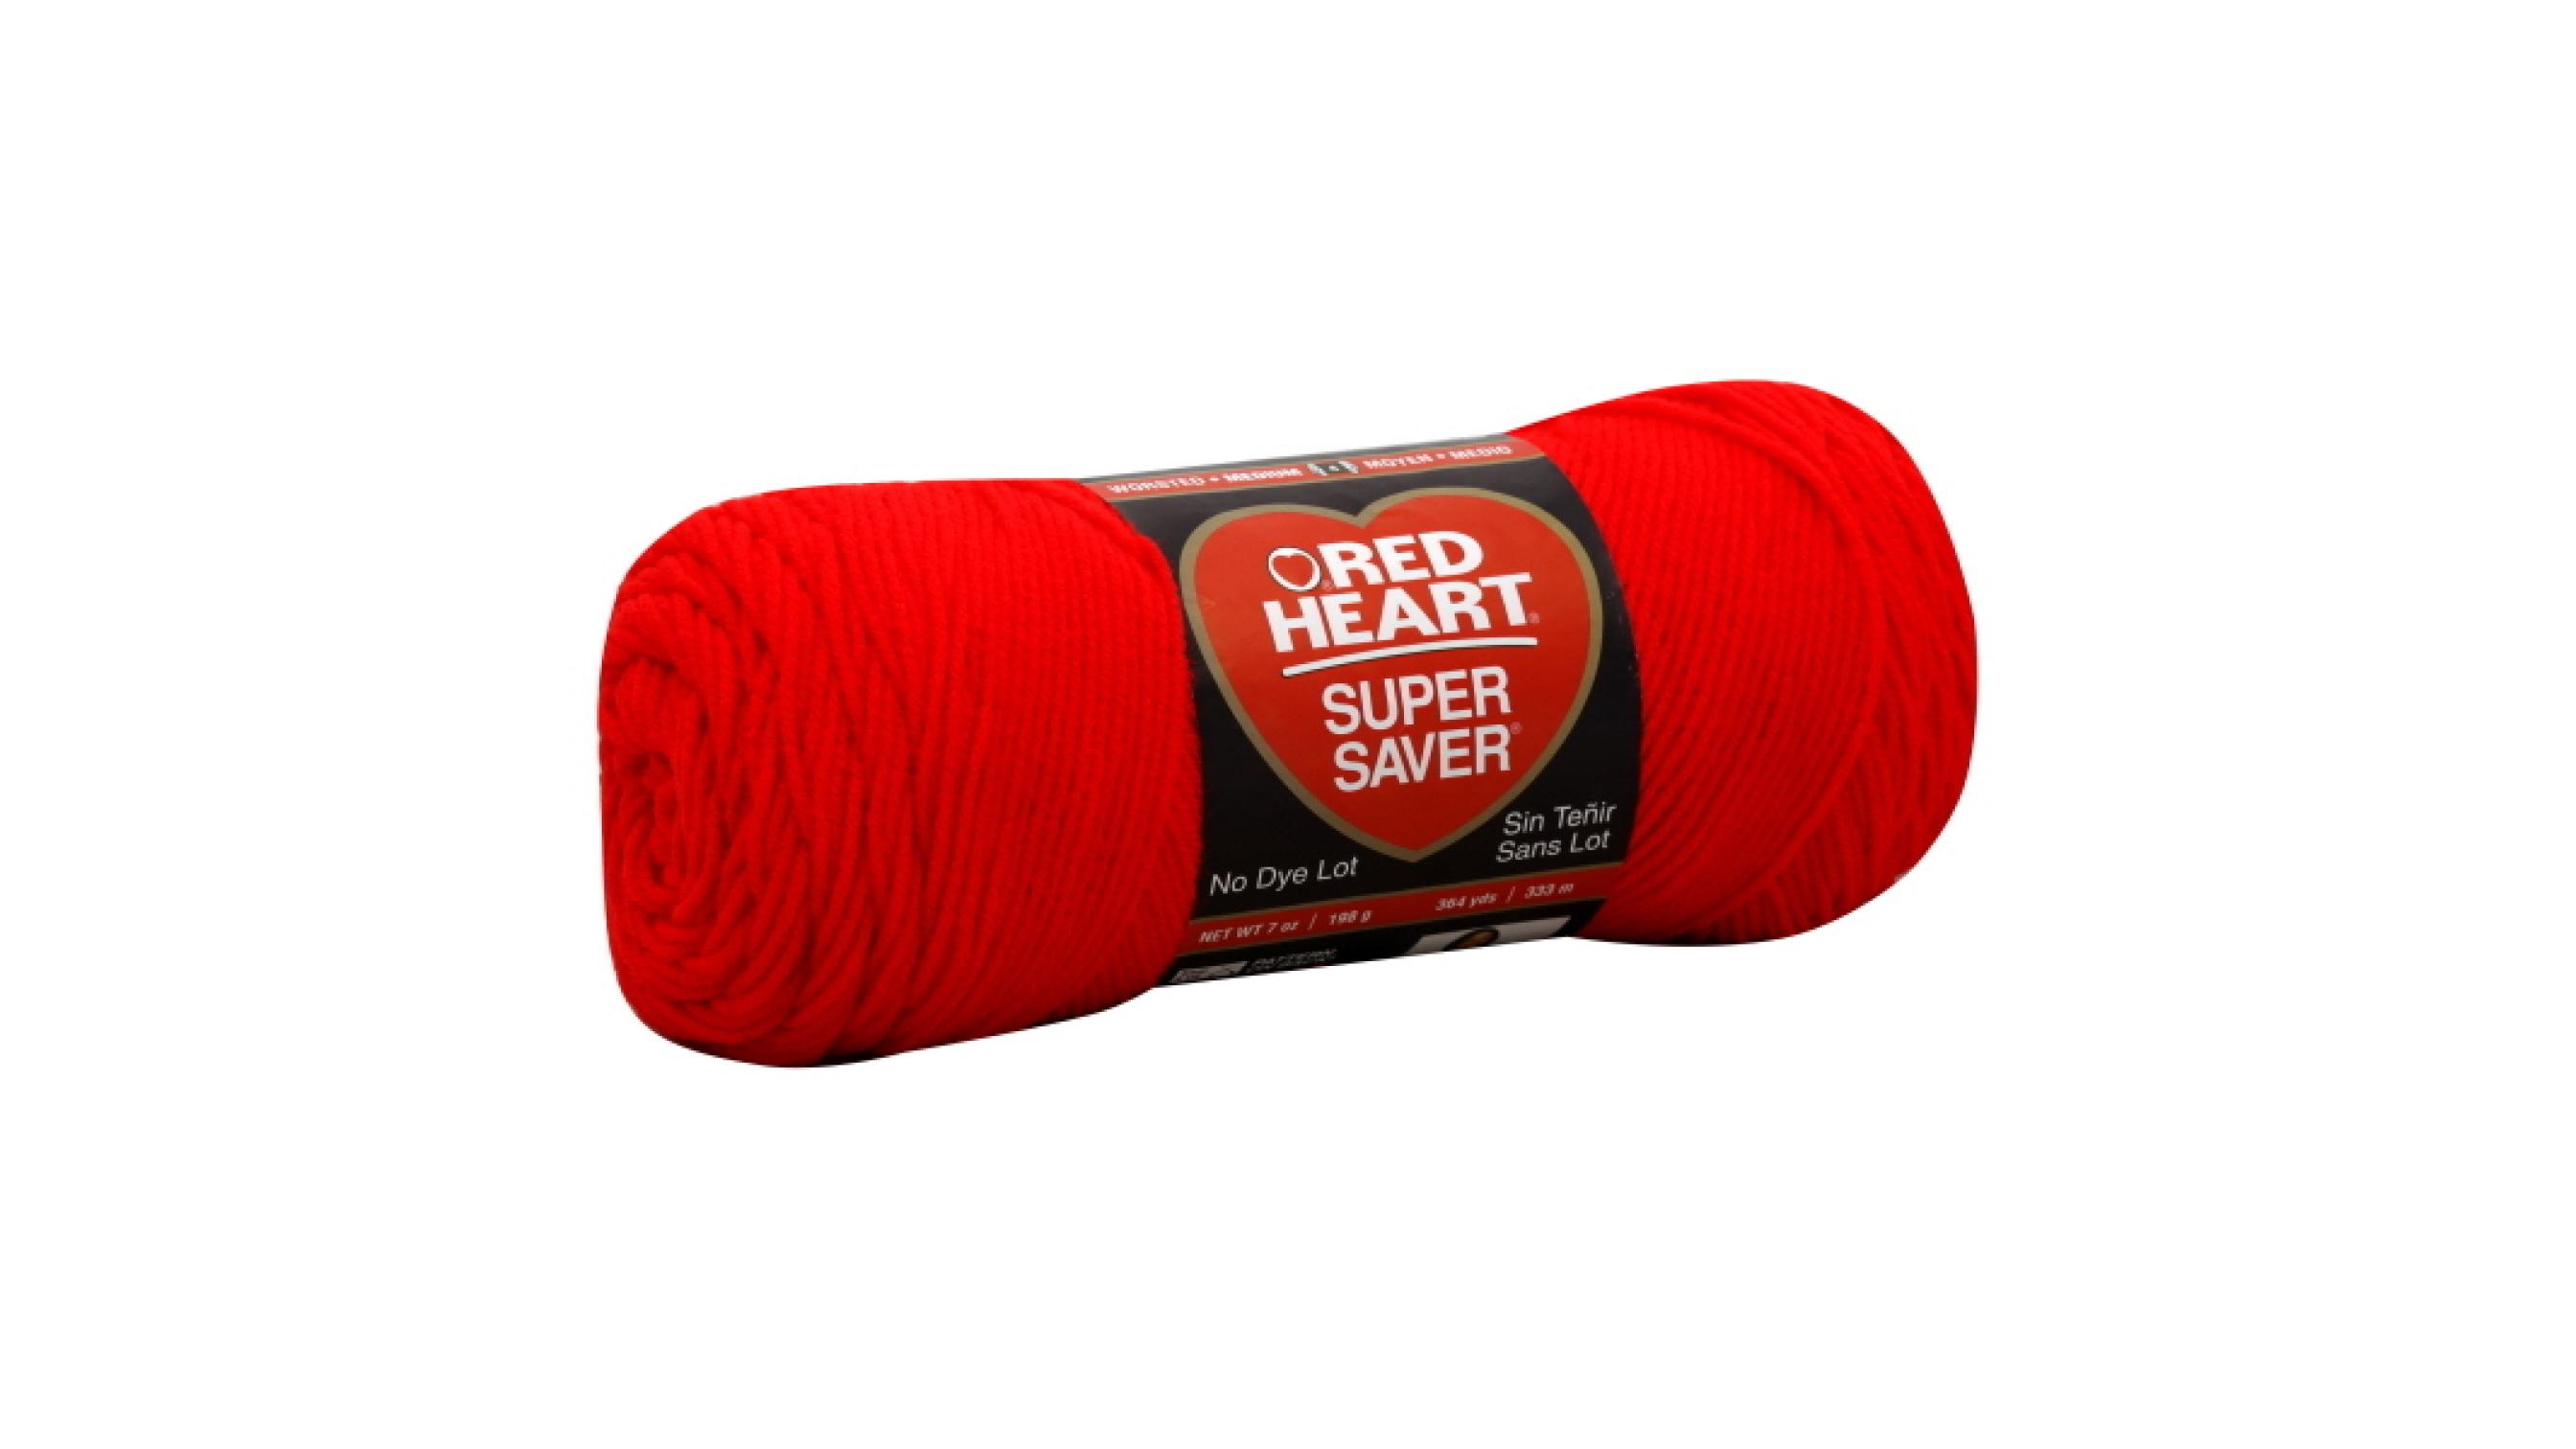 Red Heart Yarn Medium 0390 Hot Red | Delivery Near Me - Doordash